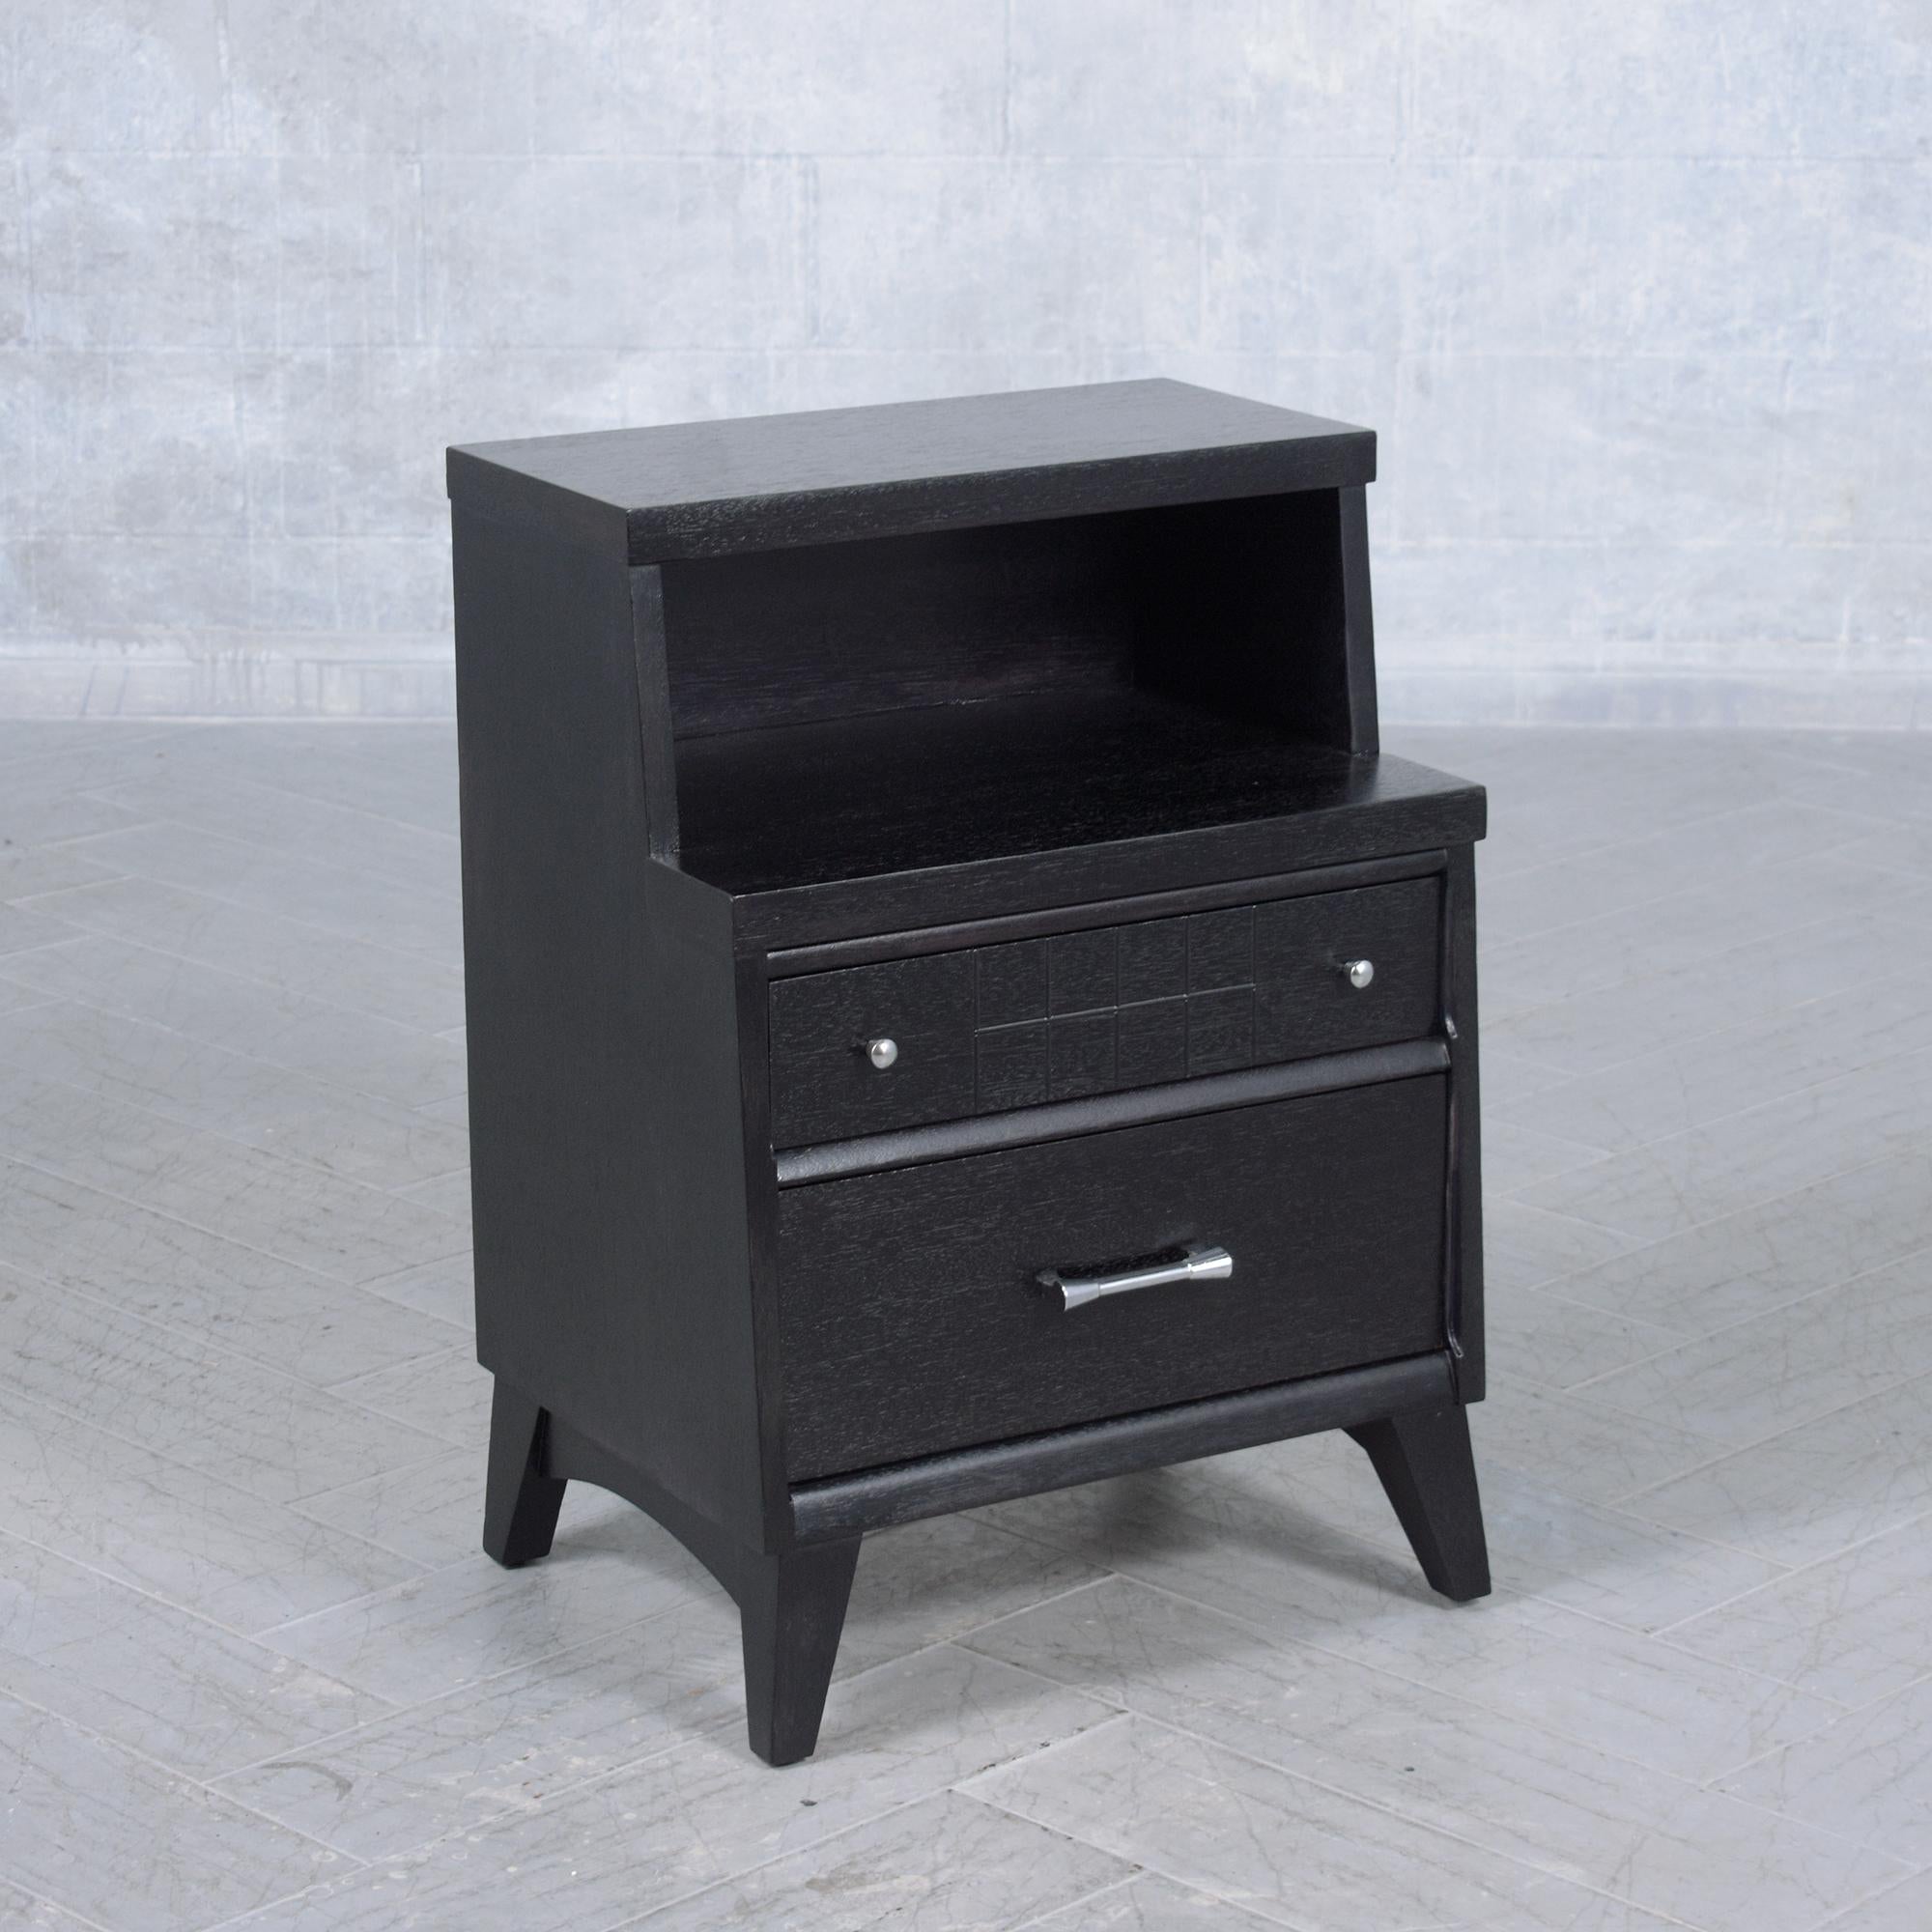 Restored Mid-Century Modern Nightstands with Ebonized Finish and Chrome Hardware For Sale 4